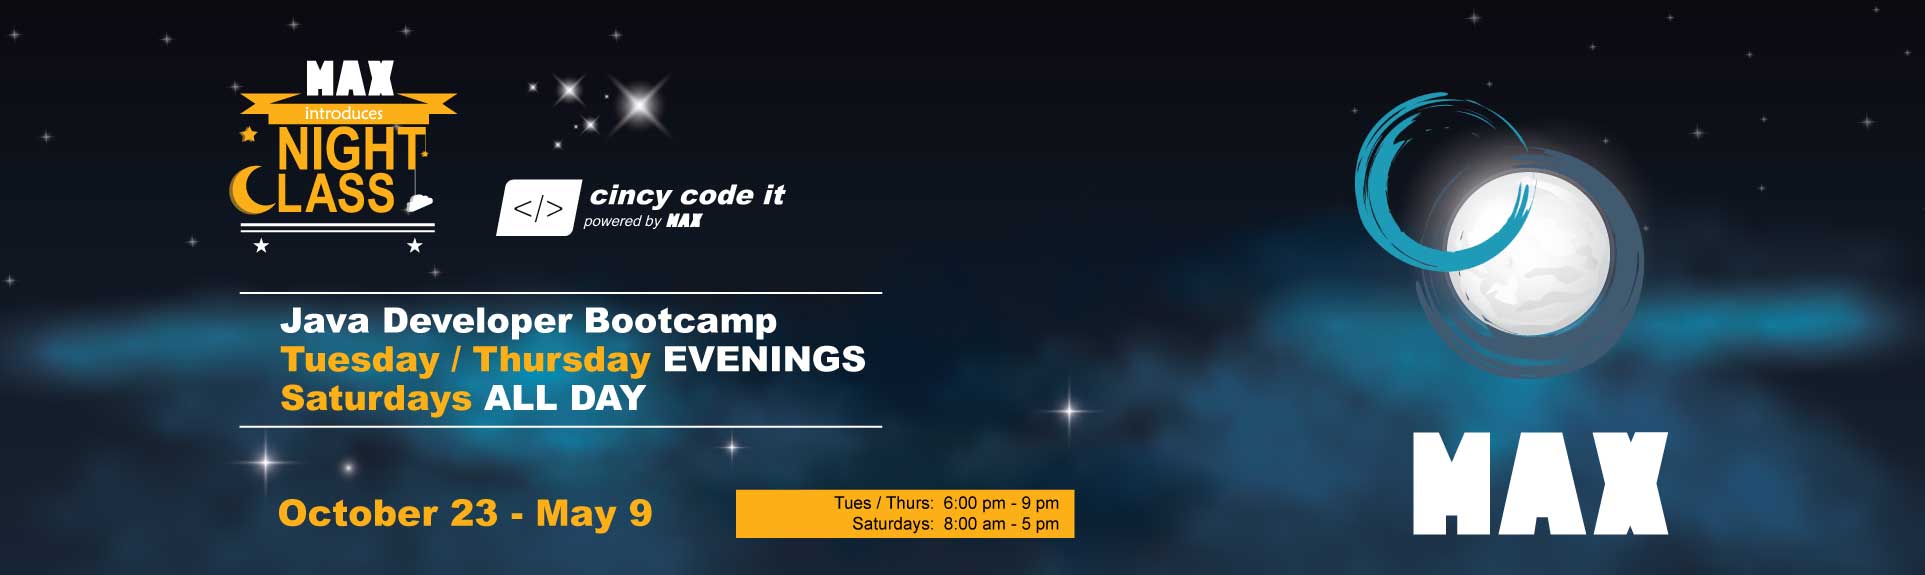 Part-time evening weekend Java coding bootcamp